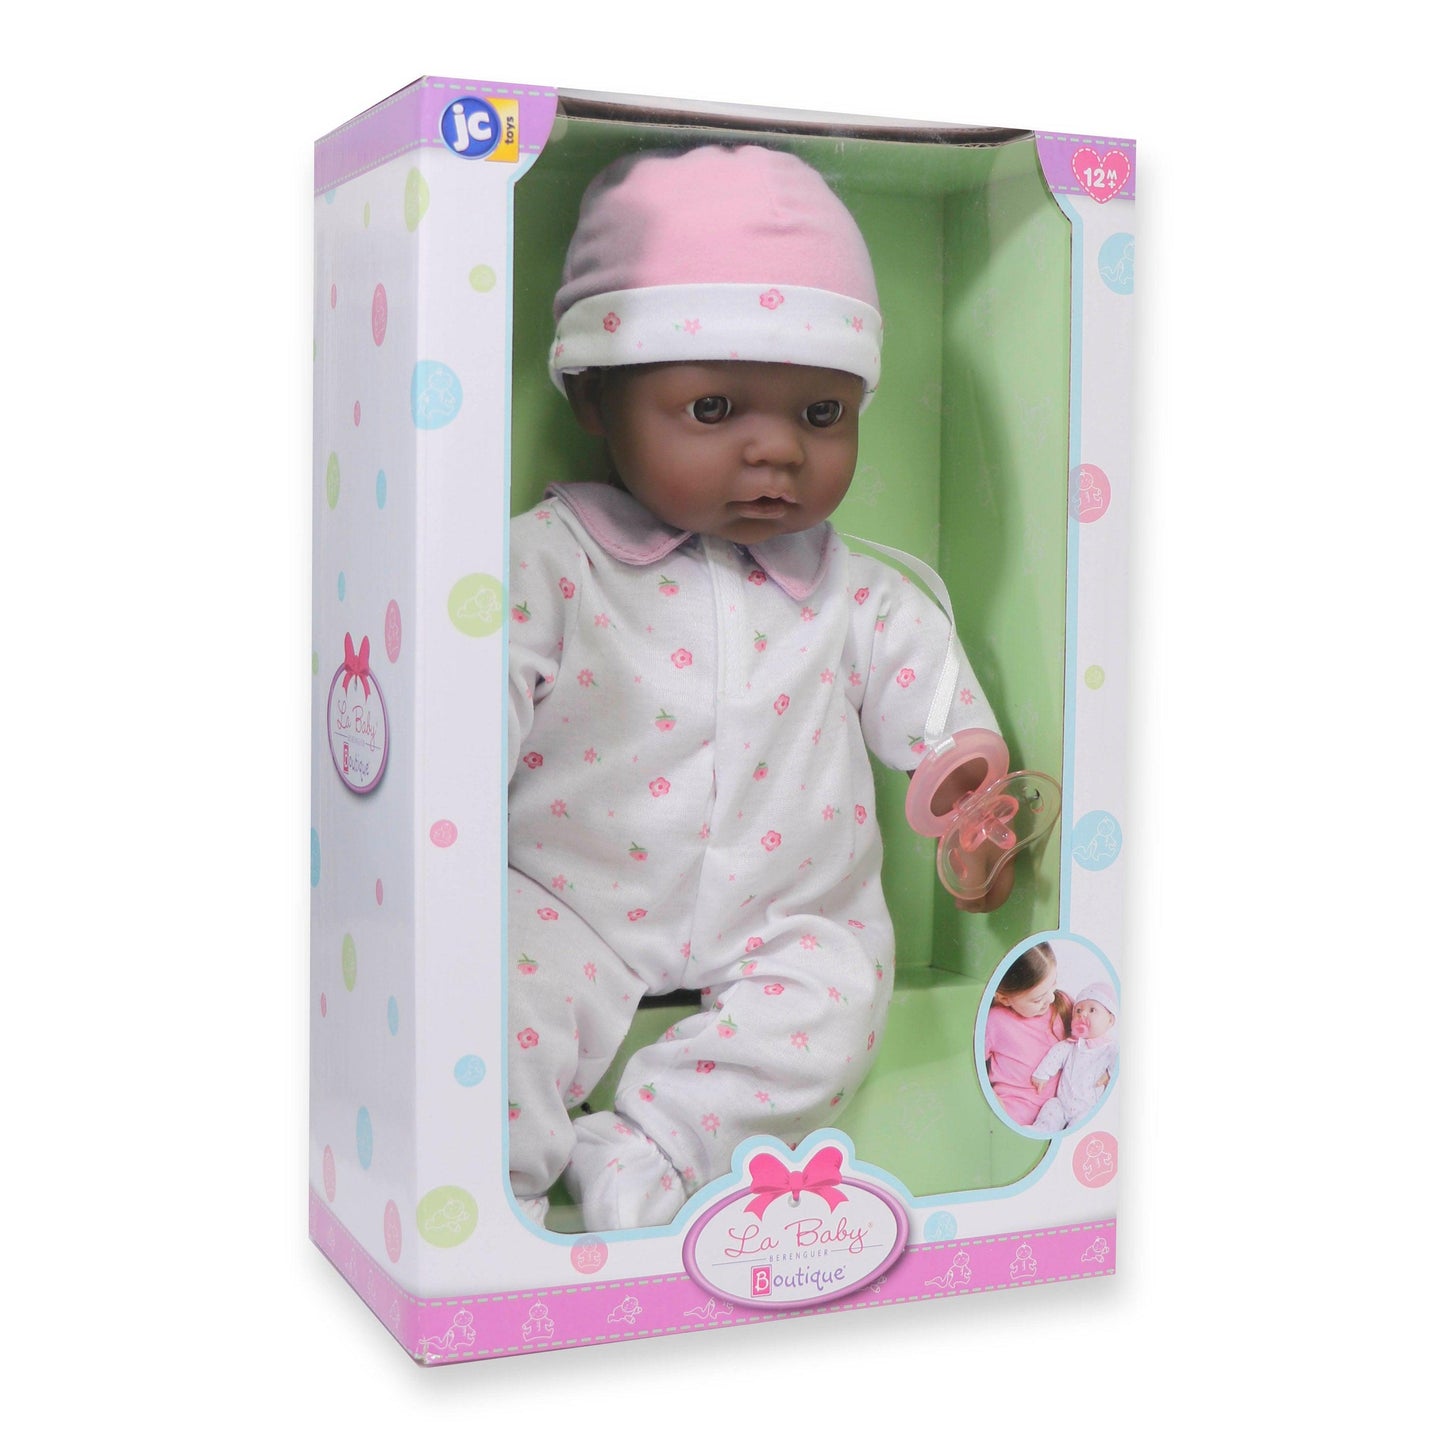 JC Toys, La Baby 16 inches Soft Body African American Baby Doll in Purple Outfit - JC Toys Group Inc.